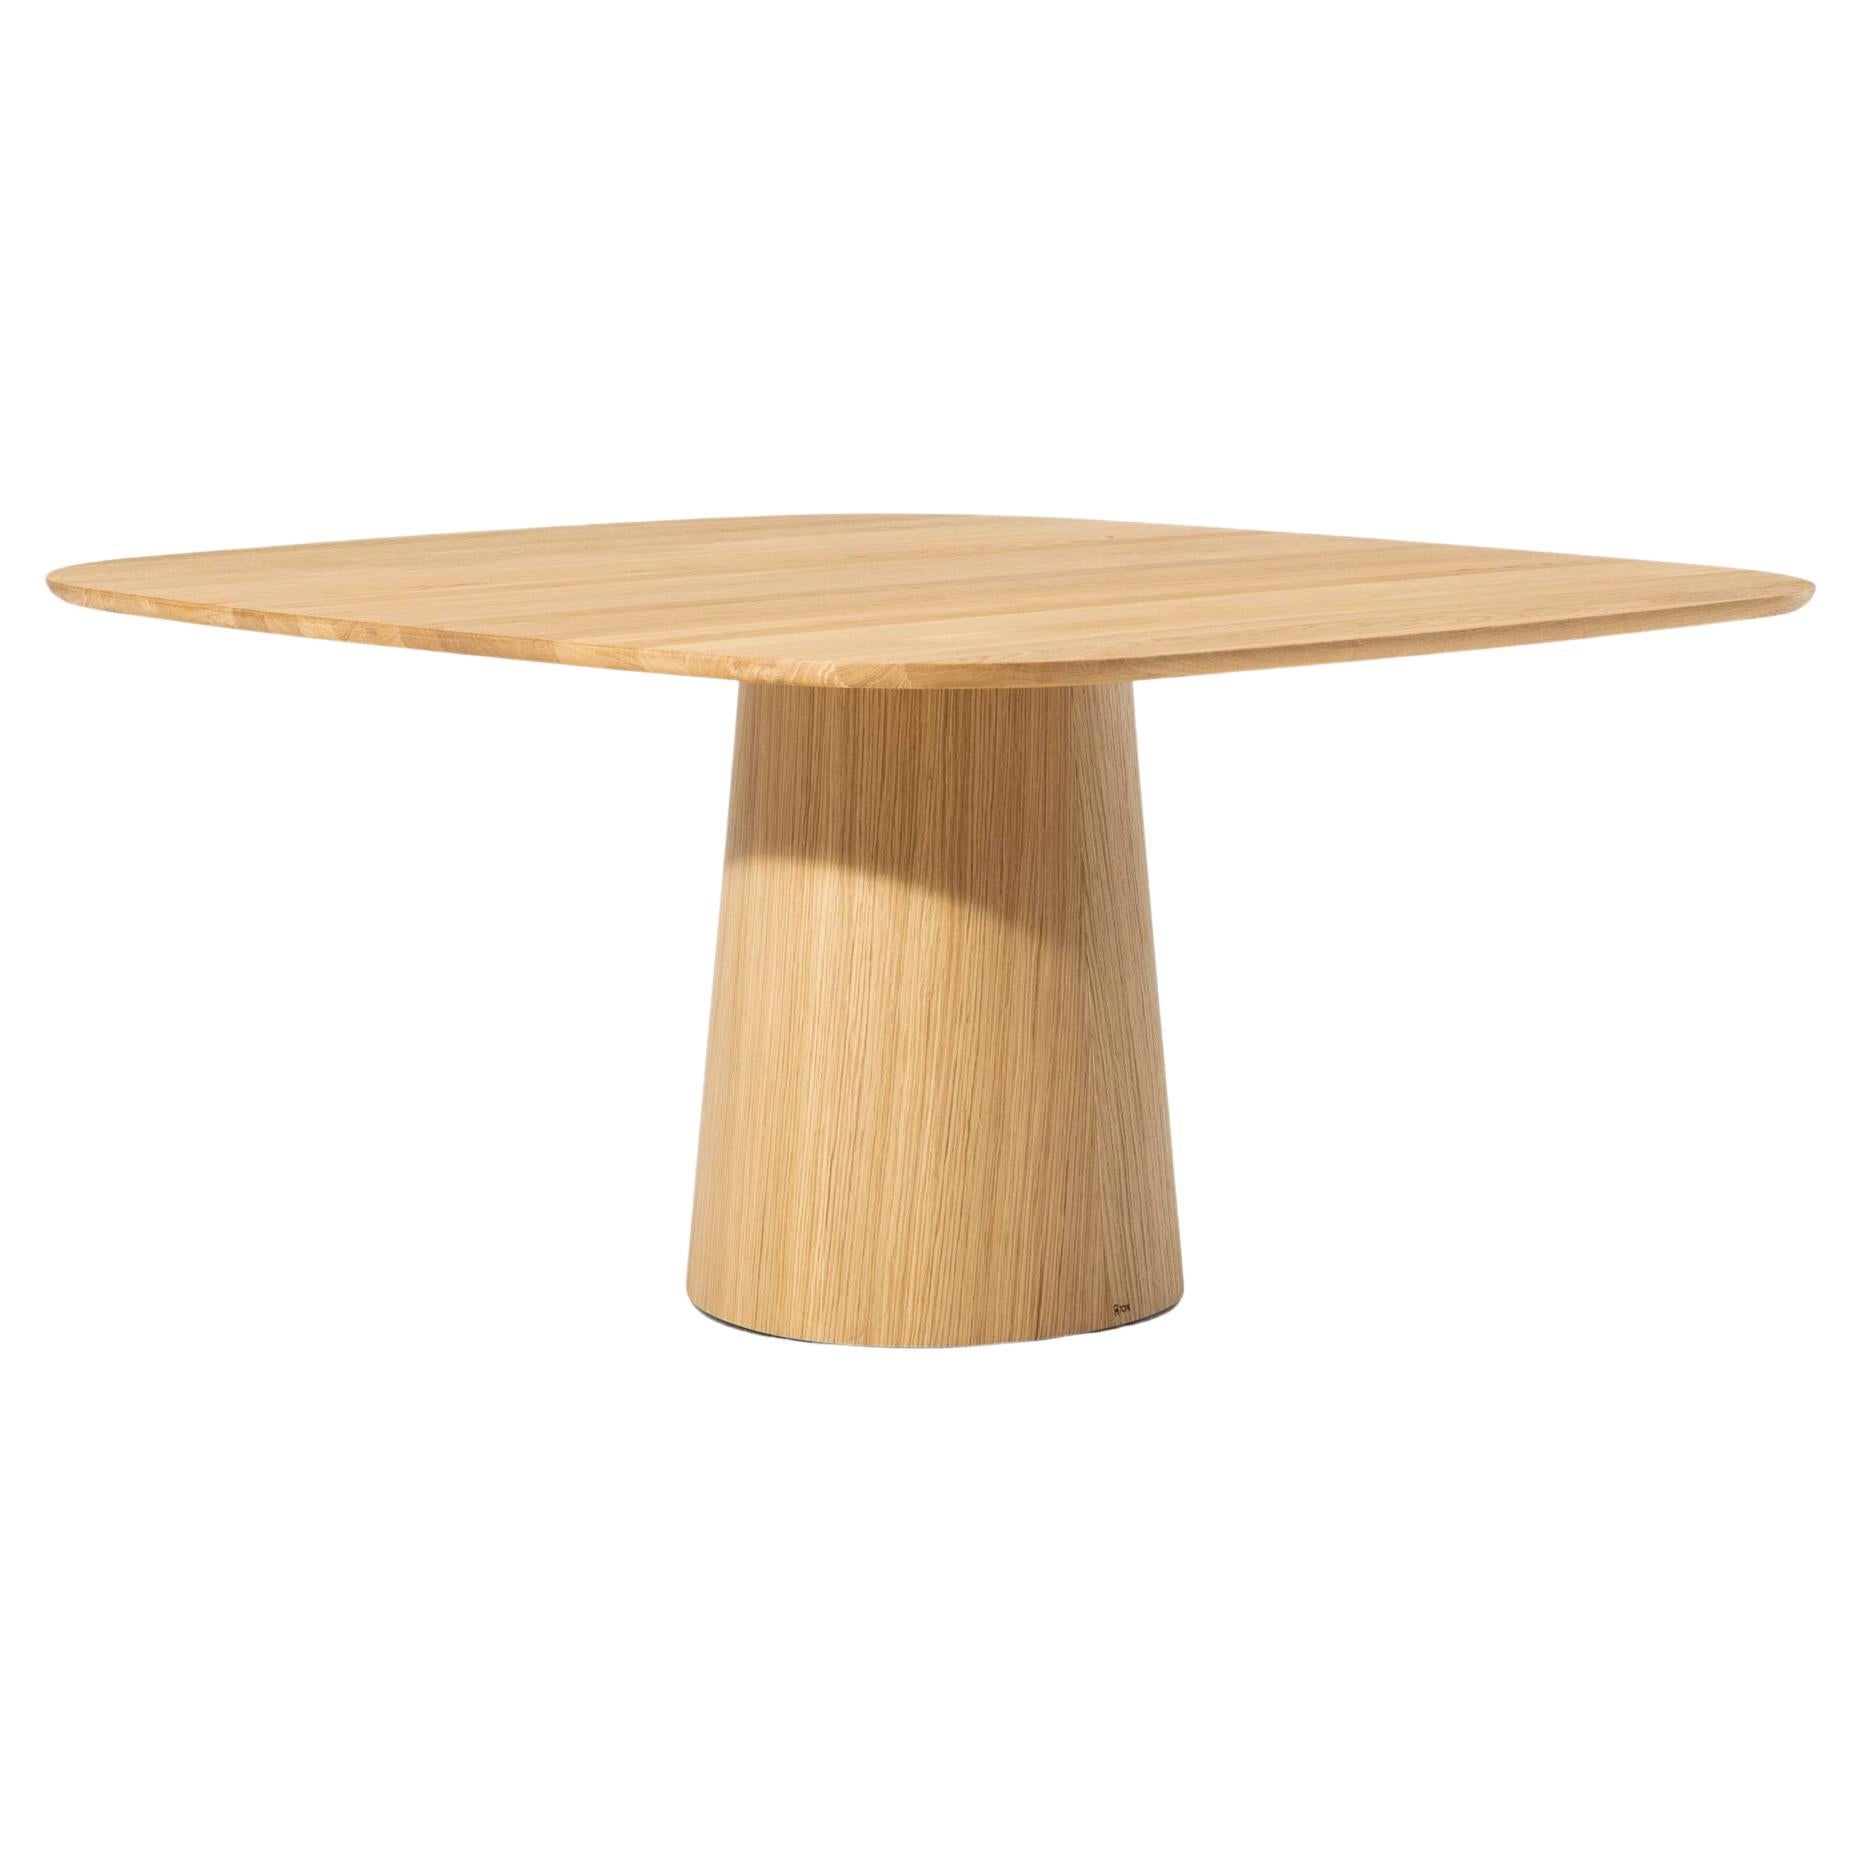 Contemporary Dining Table POV 462, Solid Oak or Walnut, Round or Square, 150